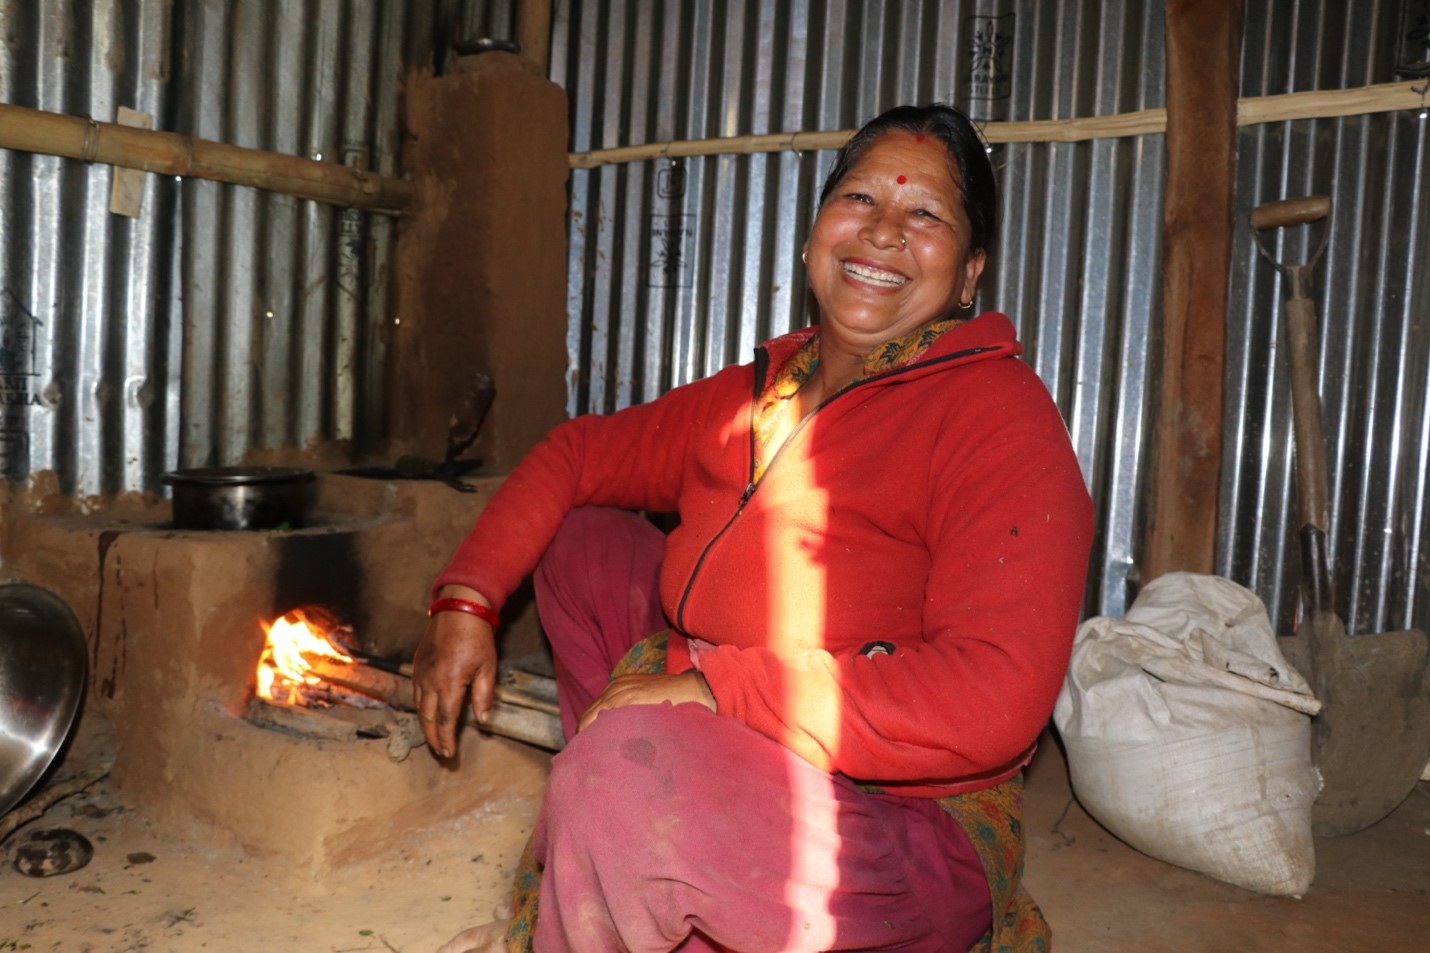 A woman posing with a big smile while cooking food